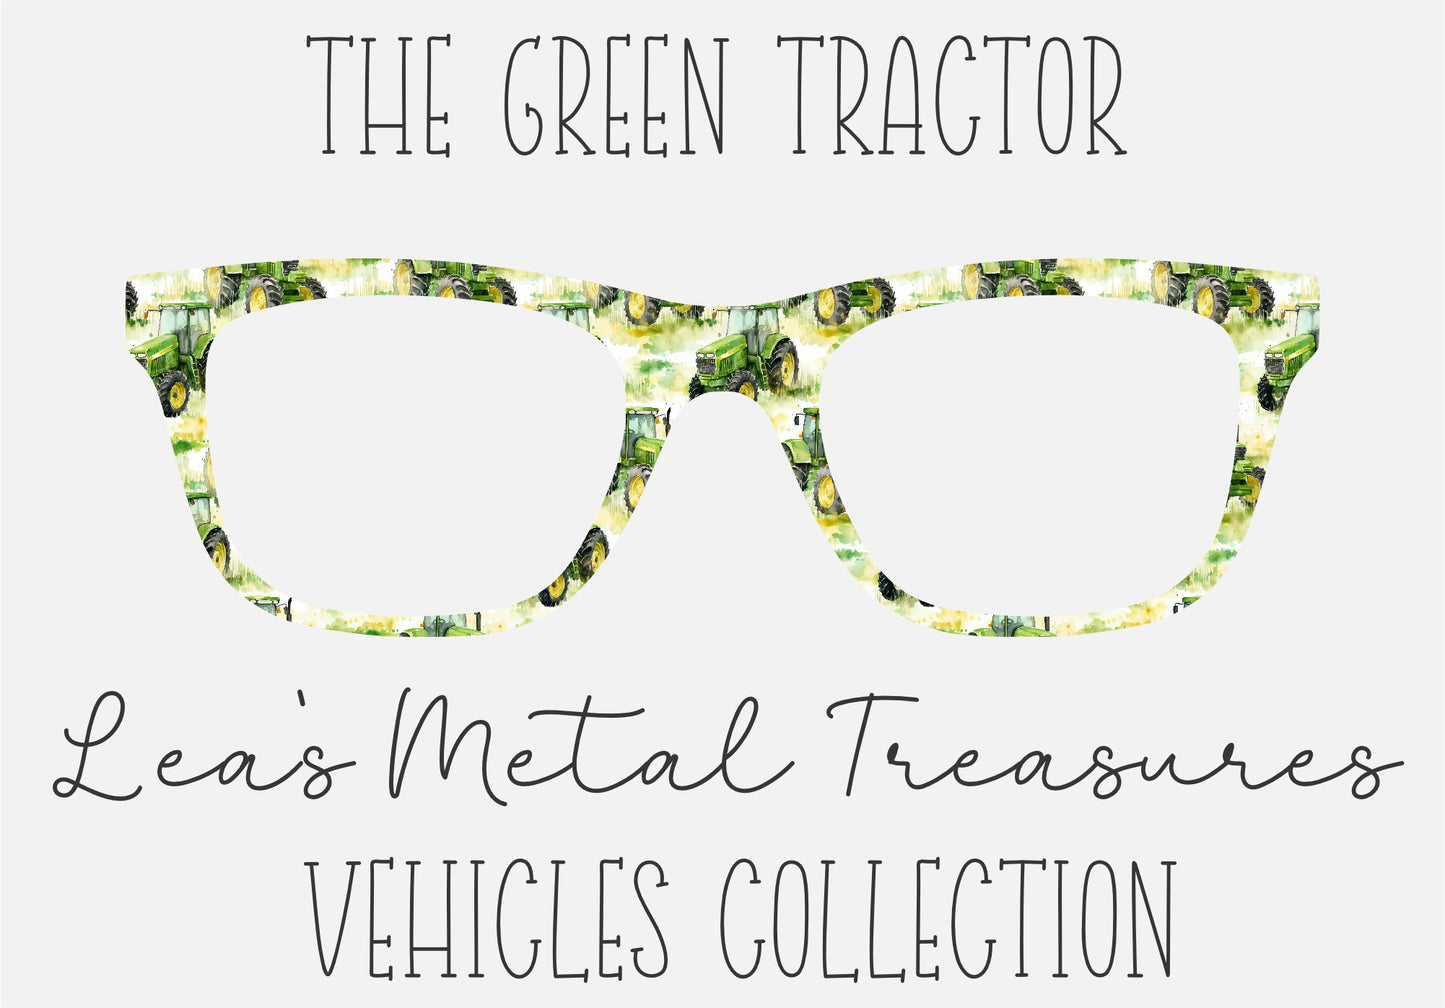 The Green Tractor